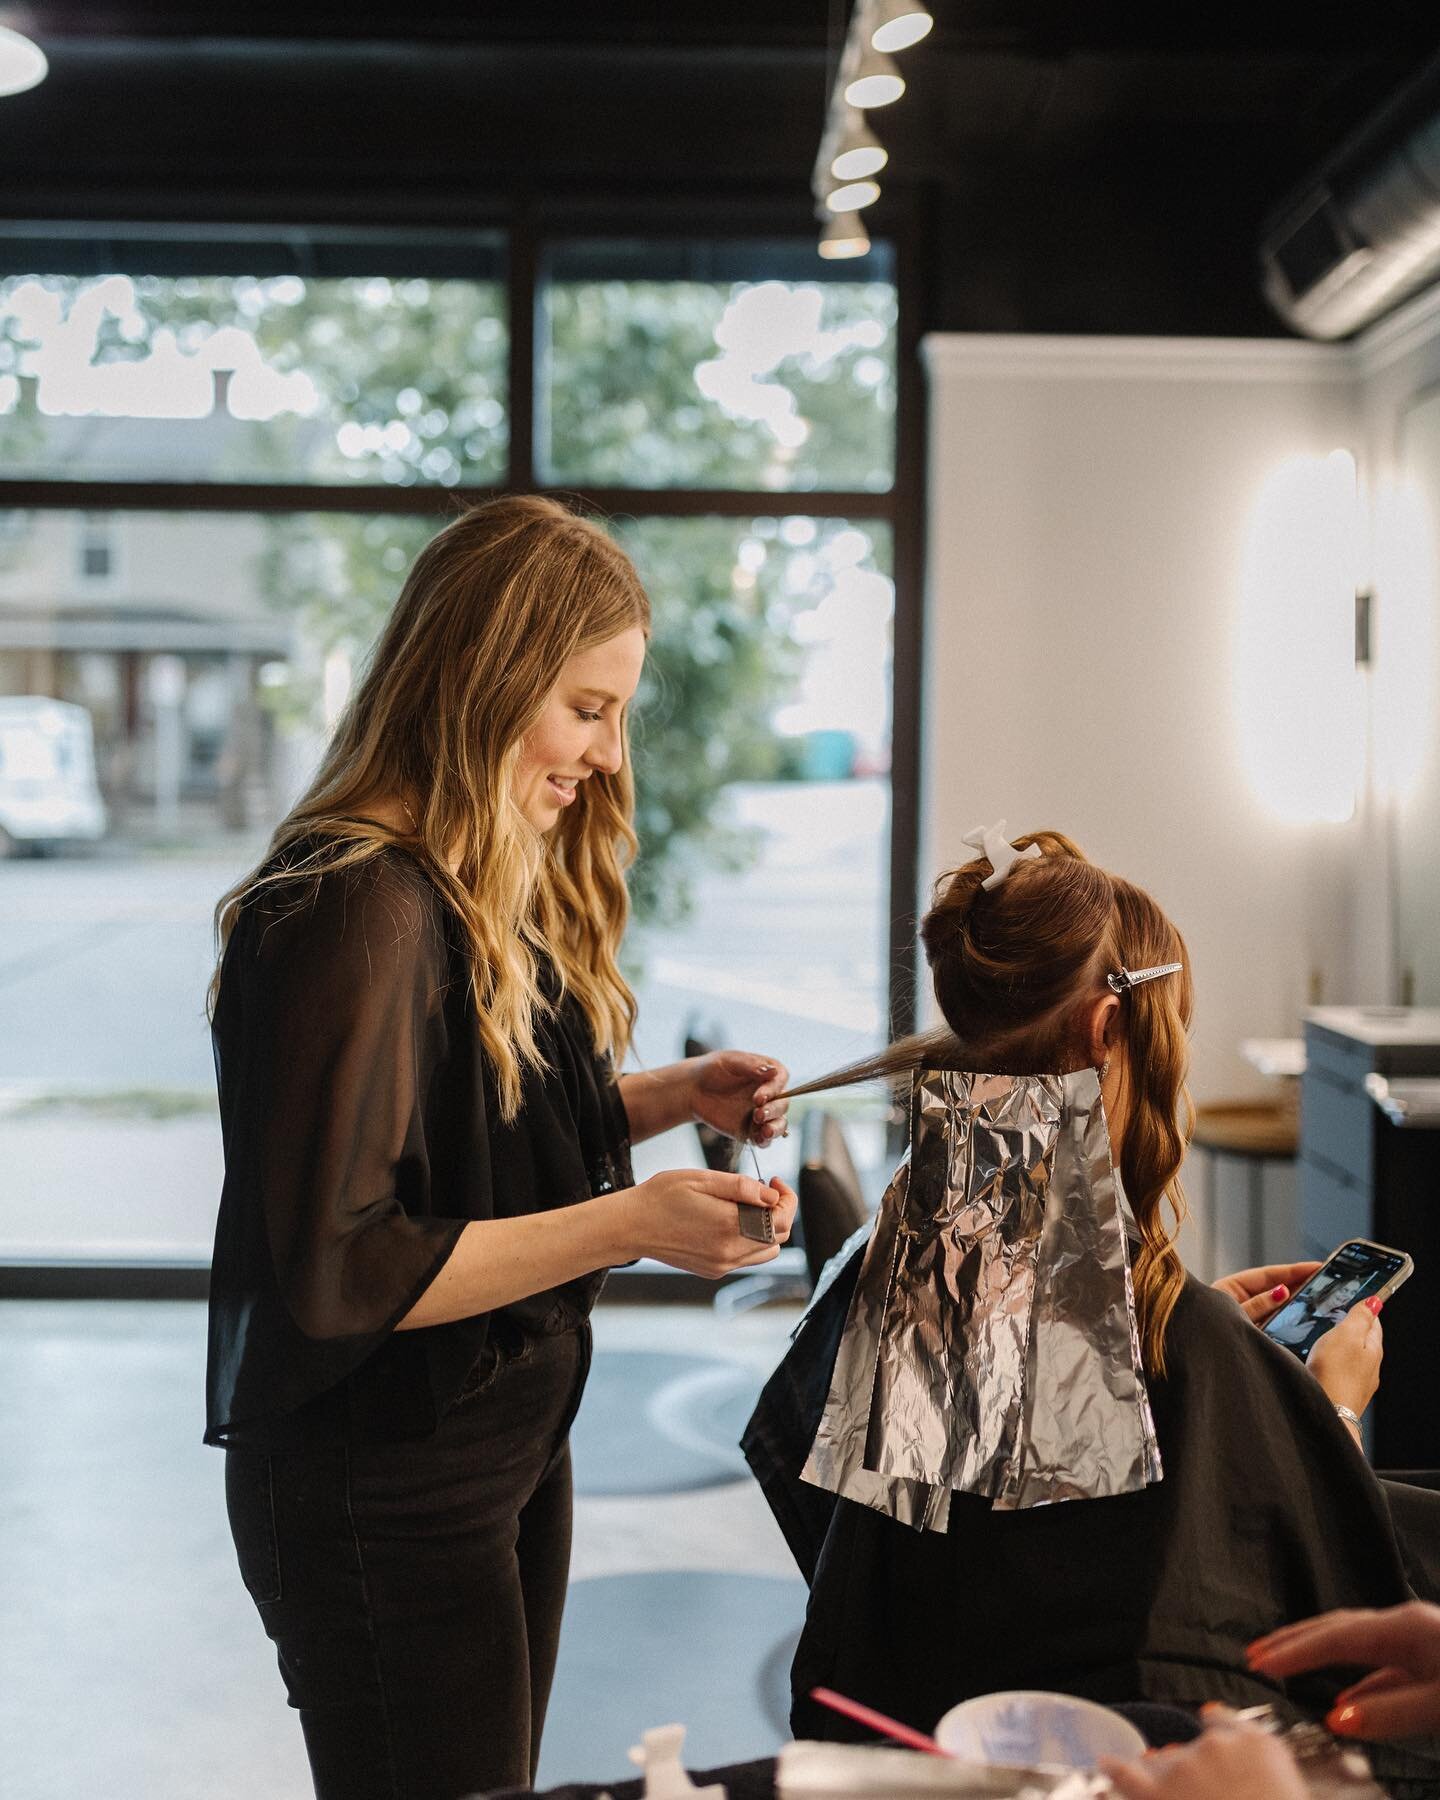 📣We are hiring seasoned stylists to join our team! 

Why Mane Haus? Great question!

✨We pride ourselves on professionalism. Not only do we strive to give our clients the best possible customer experience, but we hold stylist interpersonal relations